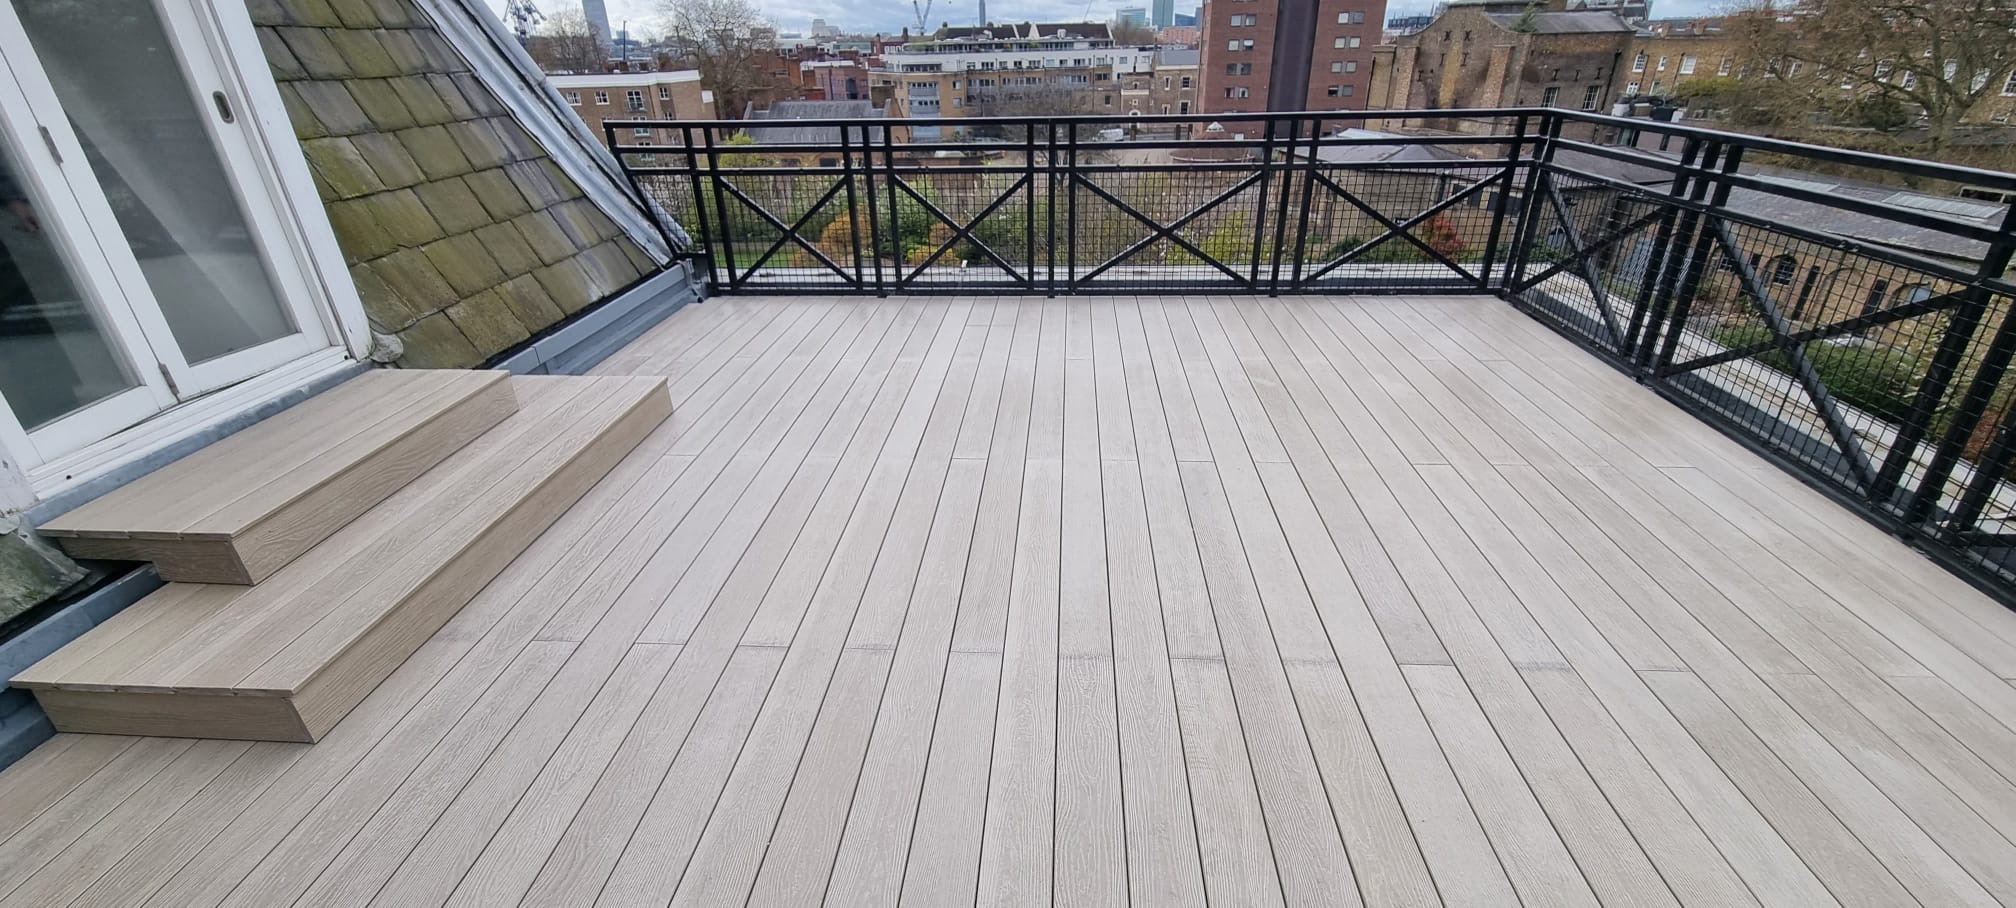 Alfresco Floors - fire-resistant decking - A1 rated